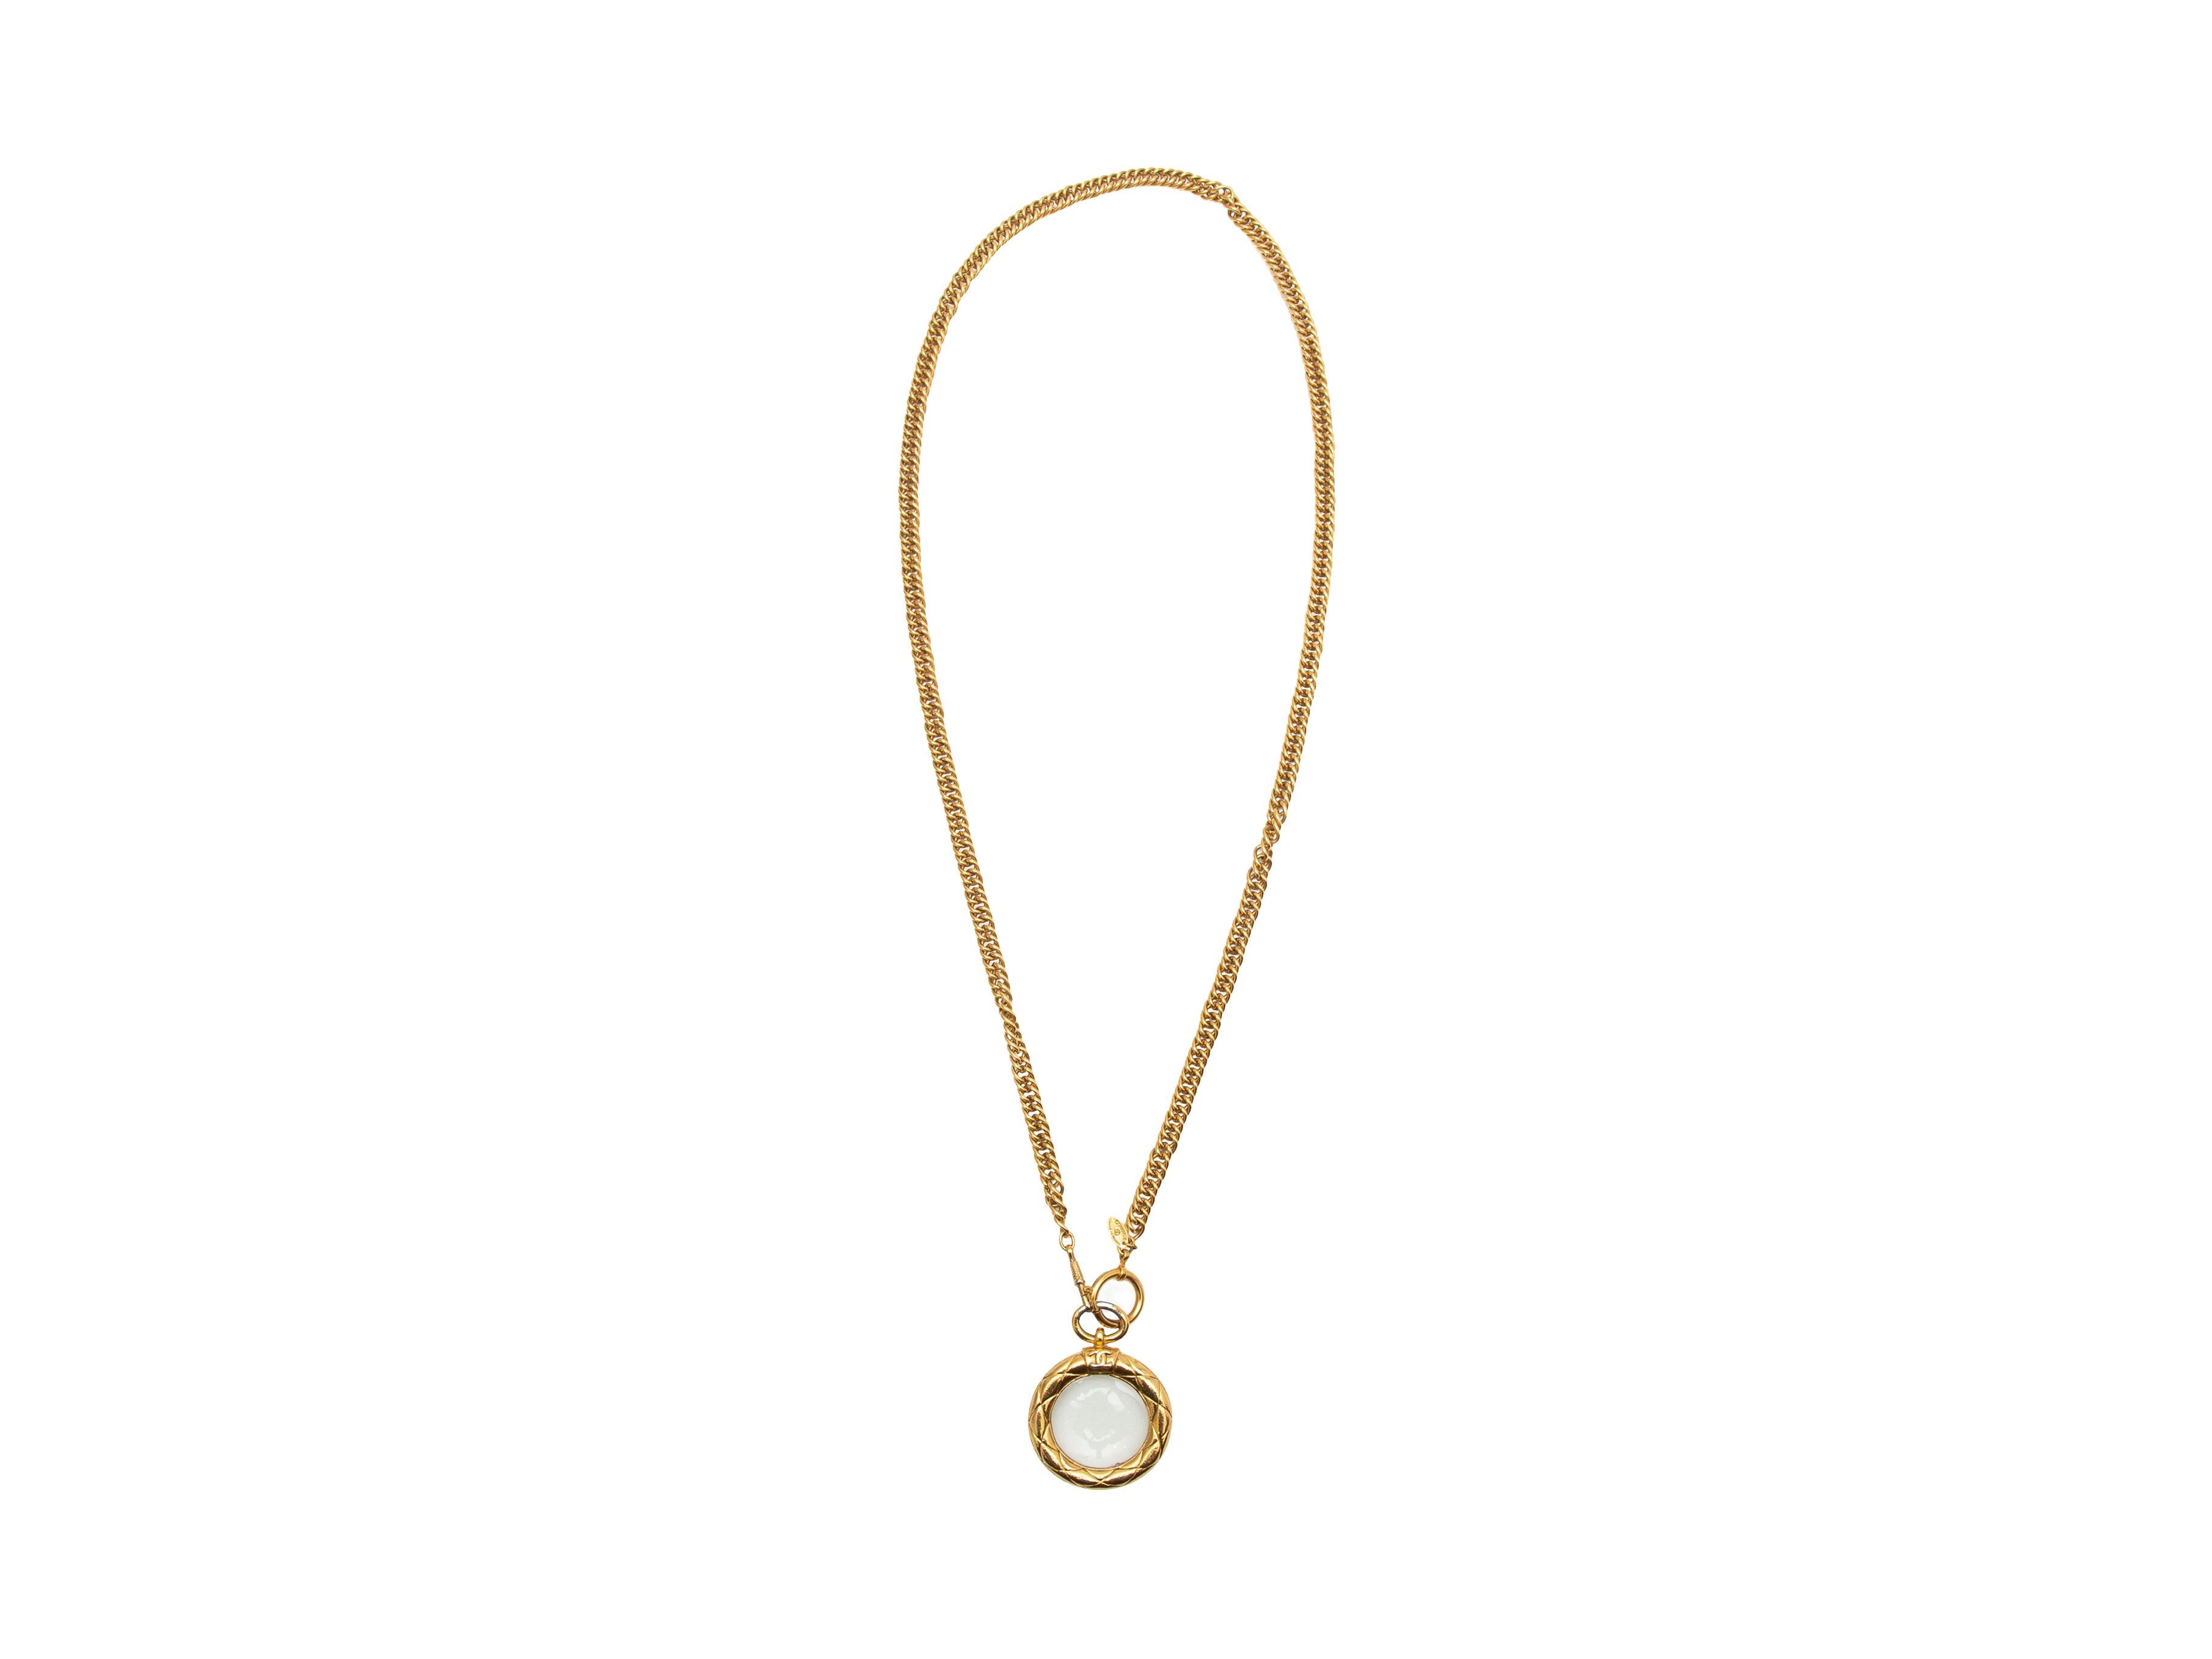 Product details: Vintage gold magnifying glass necklace by Chanel. Circa 1980s. Clasp closure at end. 20.5